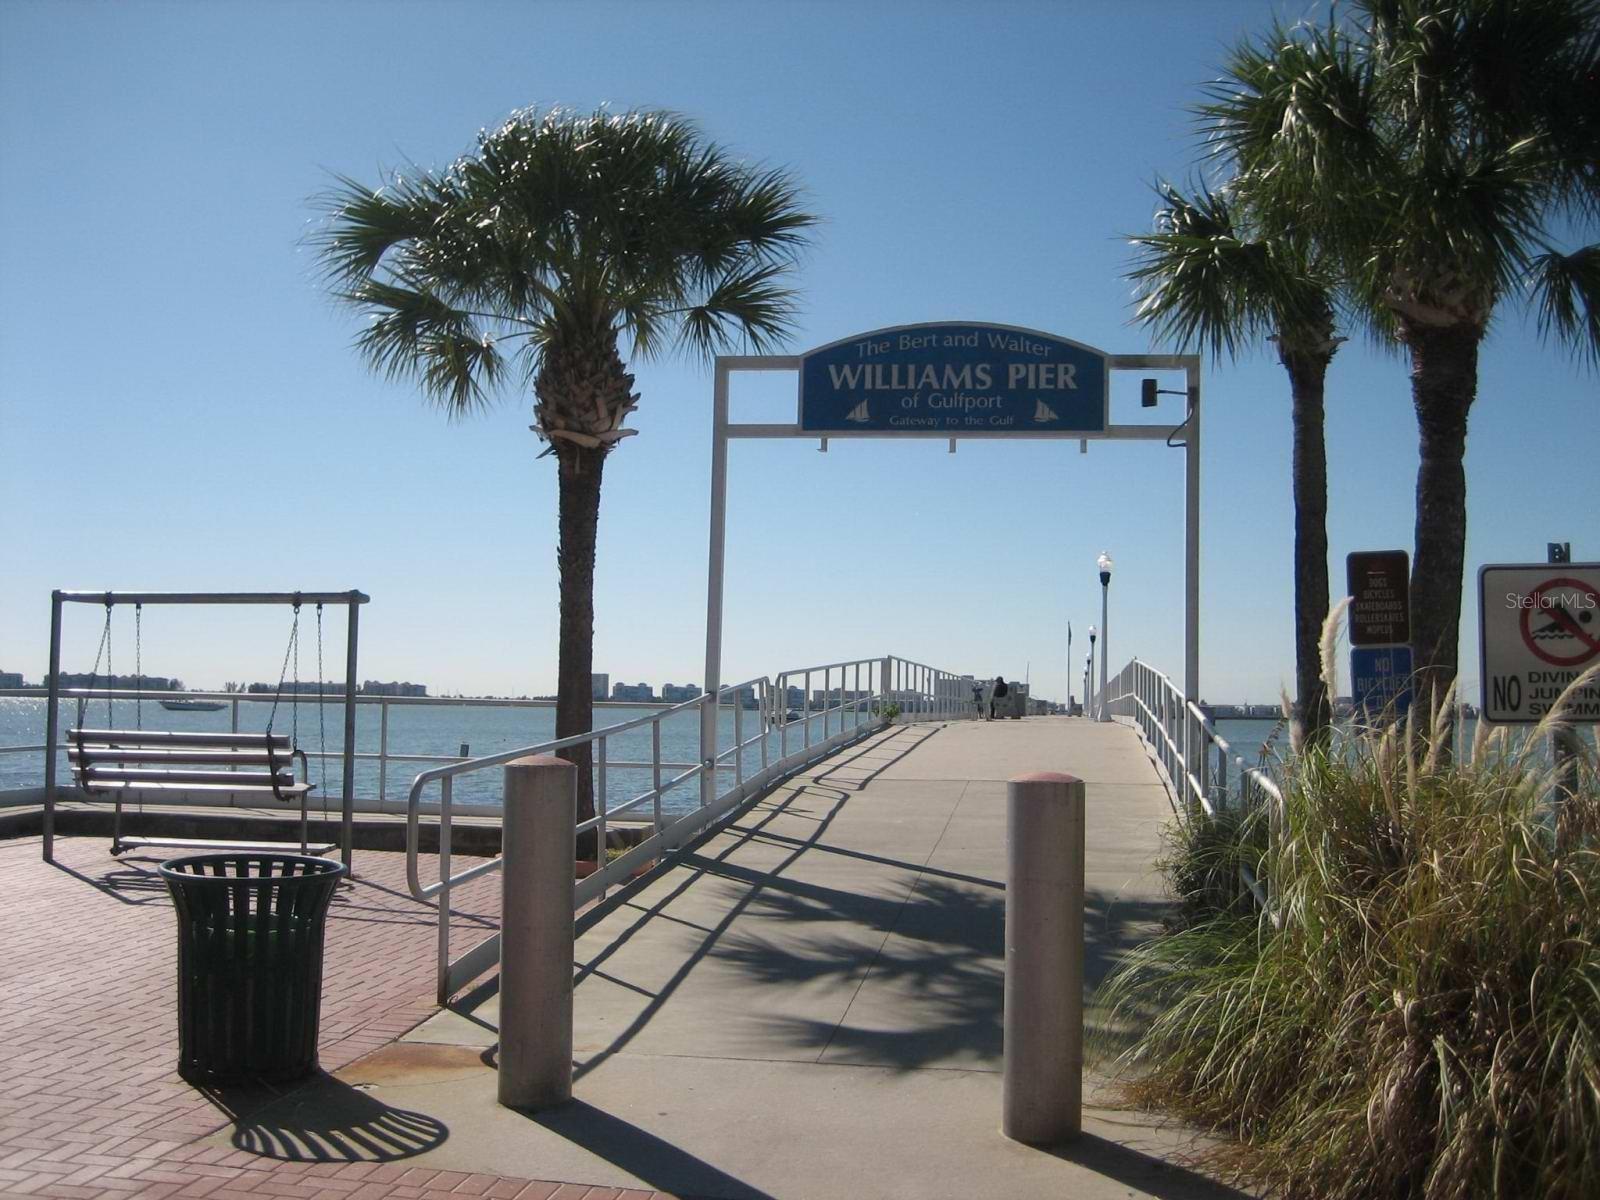 Delightful Williams Pier offers fishing, dolphins sightings and cool breezes off the bay!